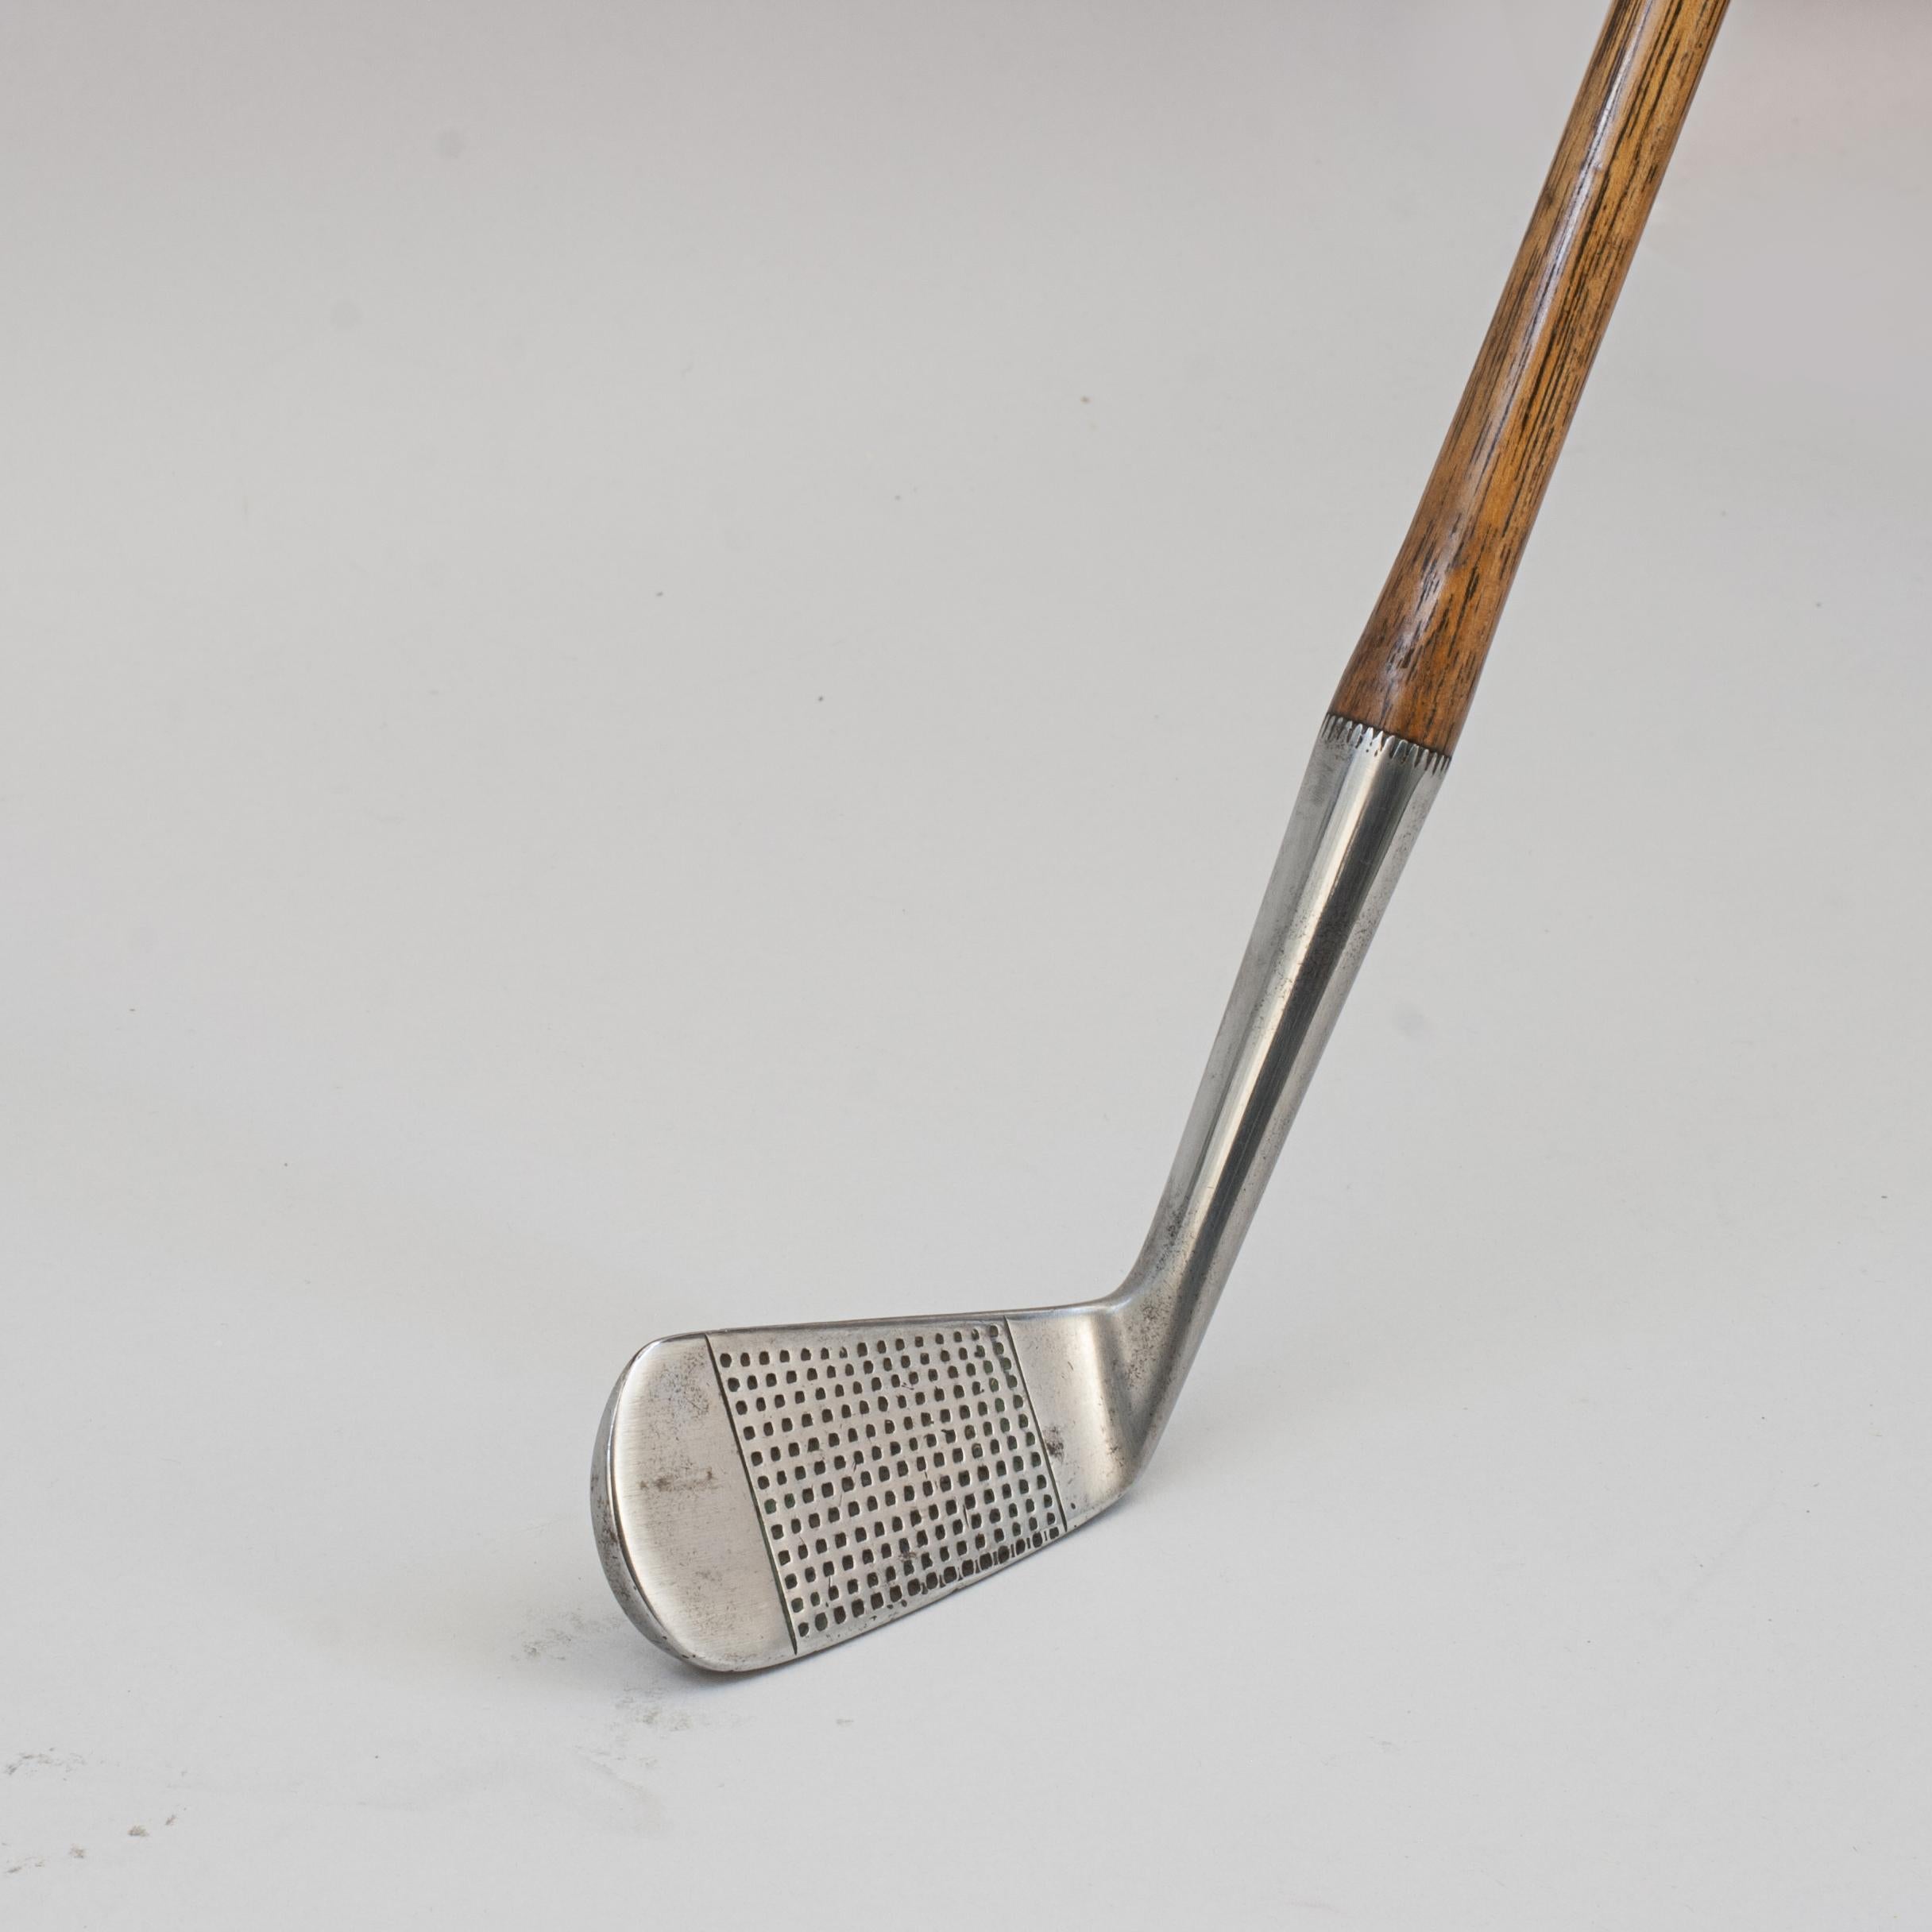 Vintage Hickory Golf Club, Mid Iron.
A fine and nicely weighted dot punched faced mid iron by Josh Taylor (brother of John Henry 